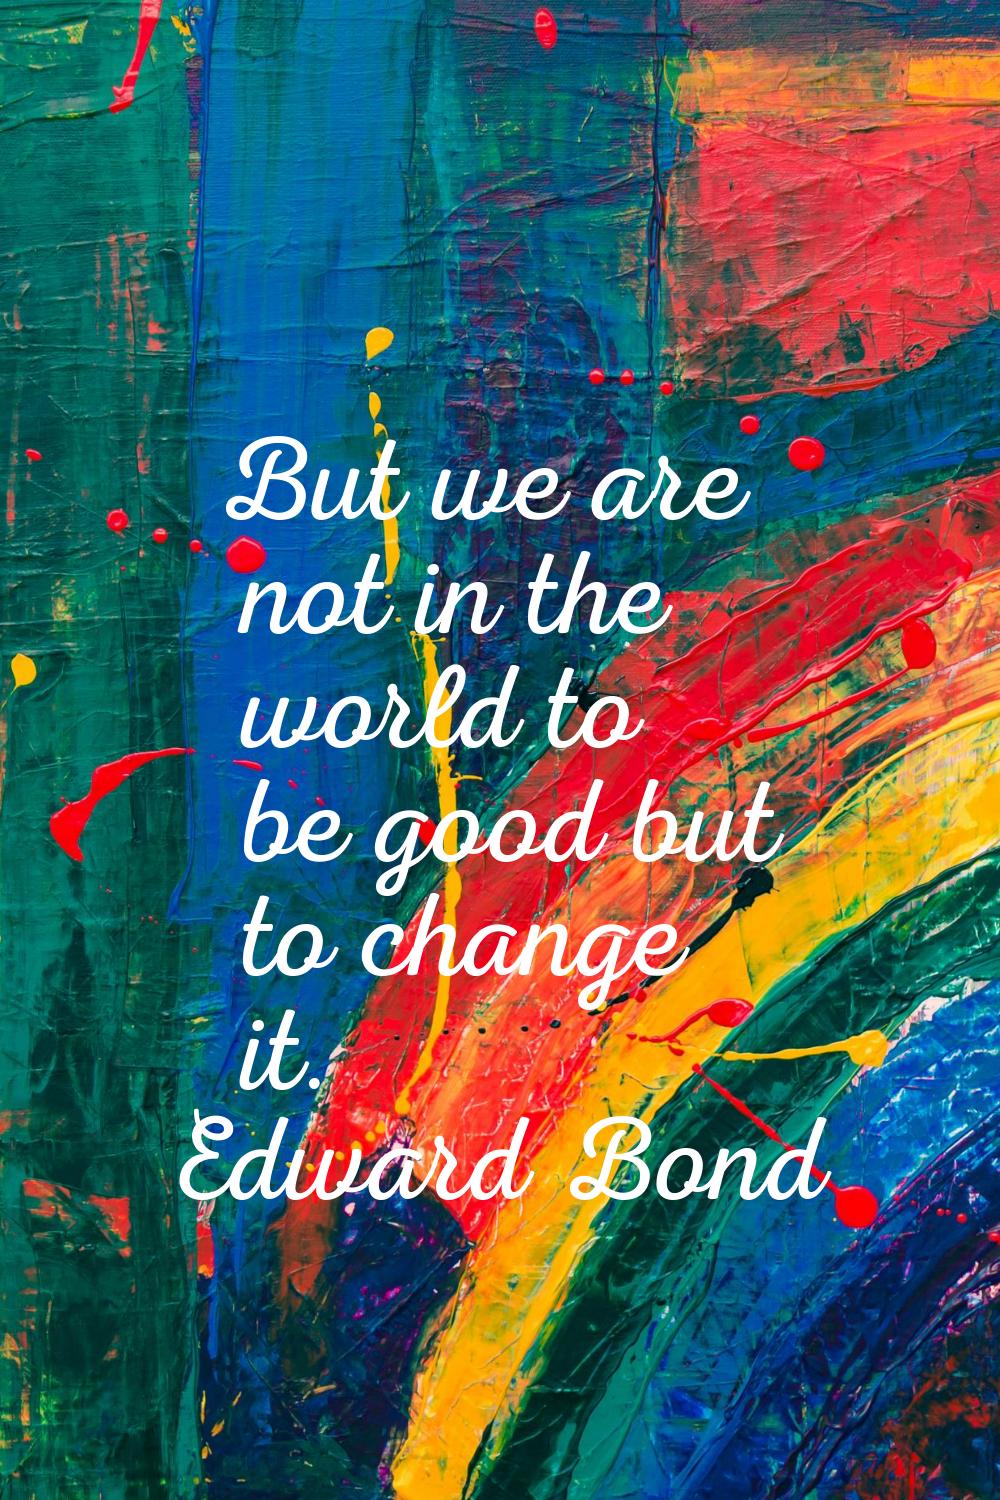 But we are not in the world to be good but to change it.